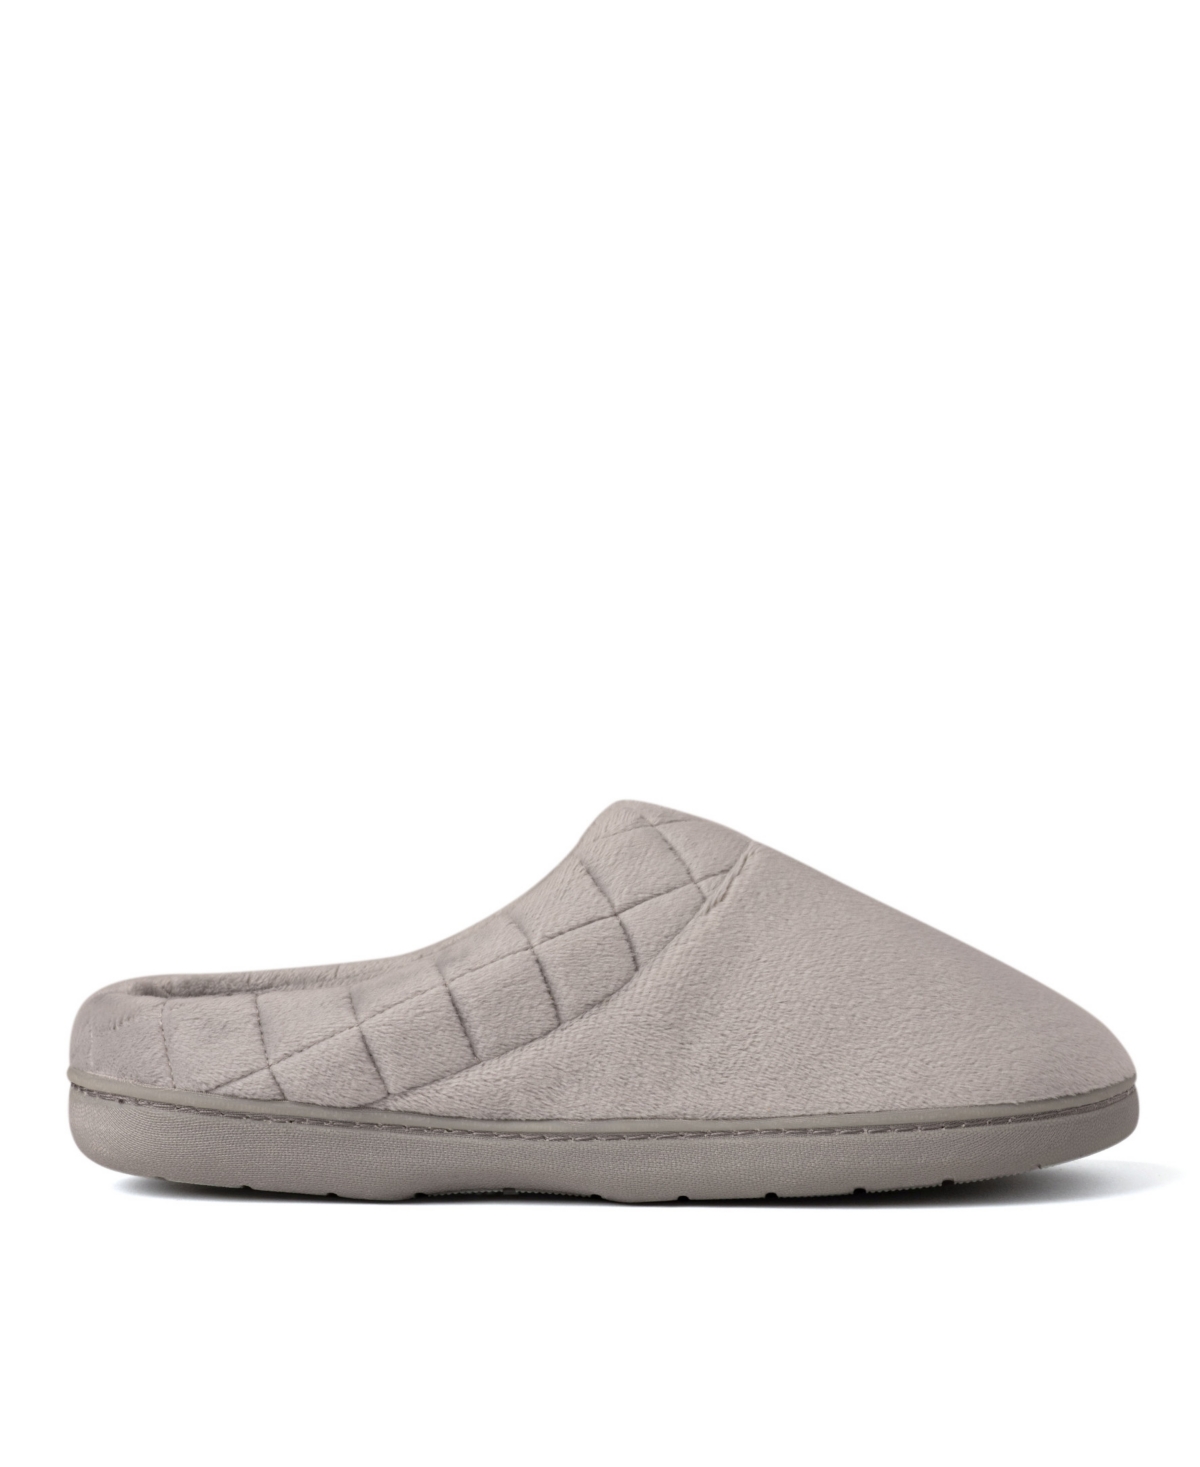 Dearfoams Women's Darcy Velour Clog With Quilted Cuff Slippers In Sleet